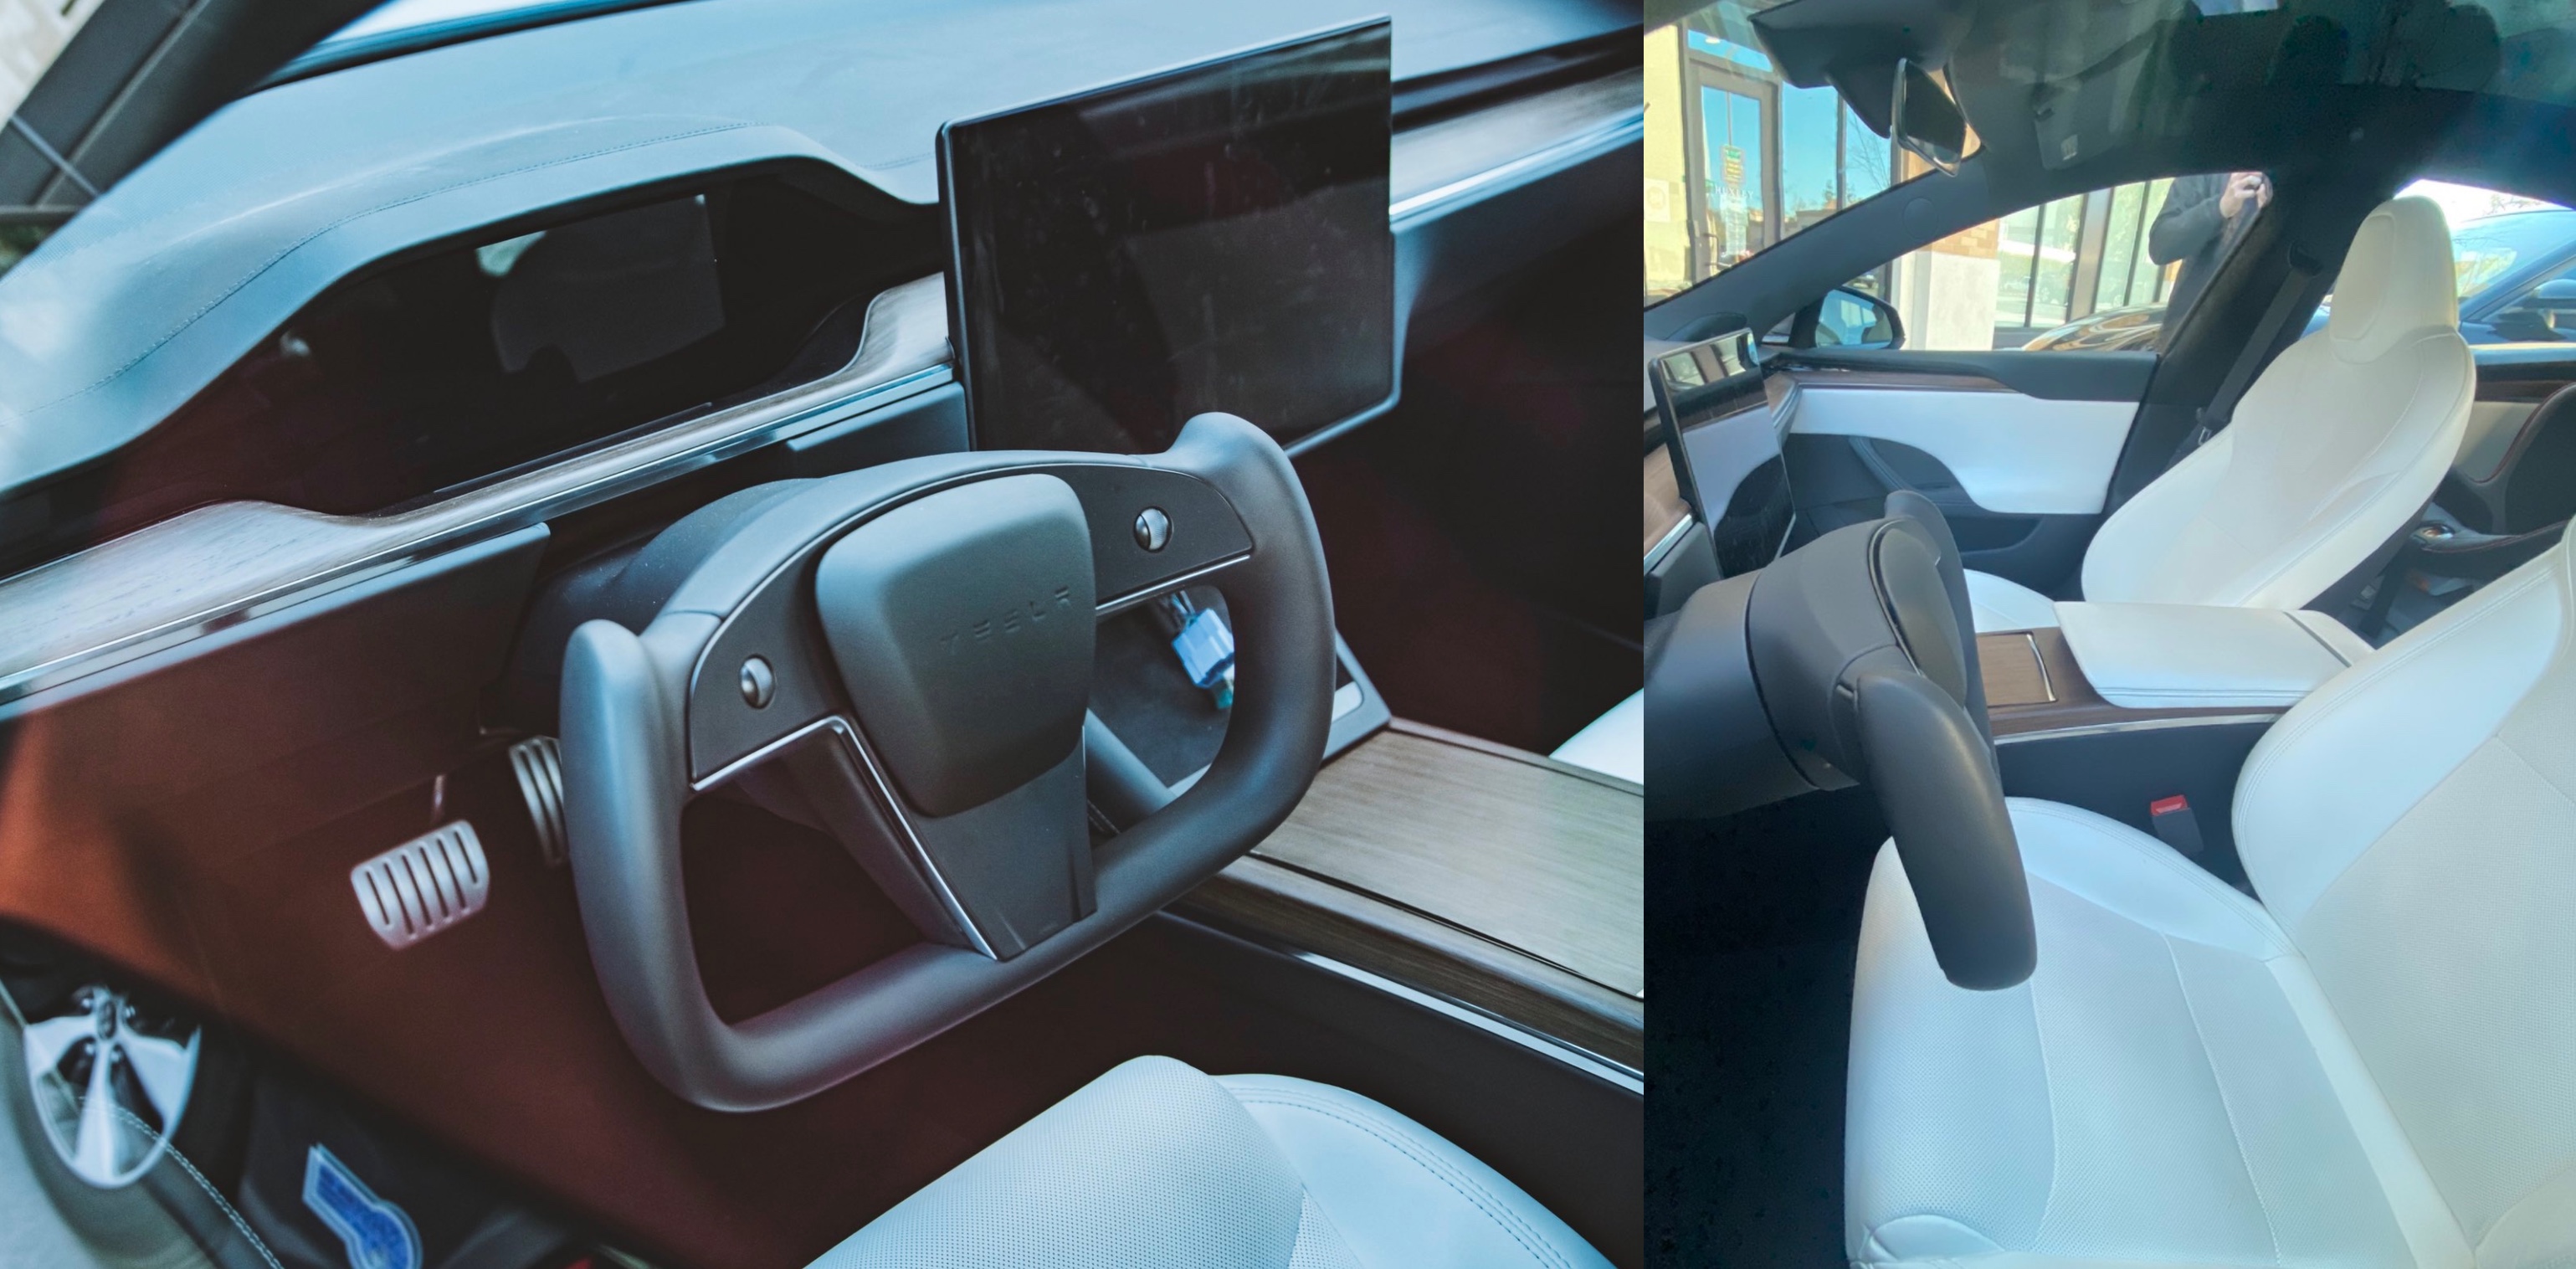 Tesla's controversial 'yoke' steering wheel spotted in the wild for the